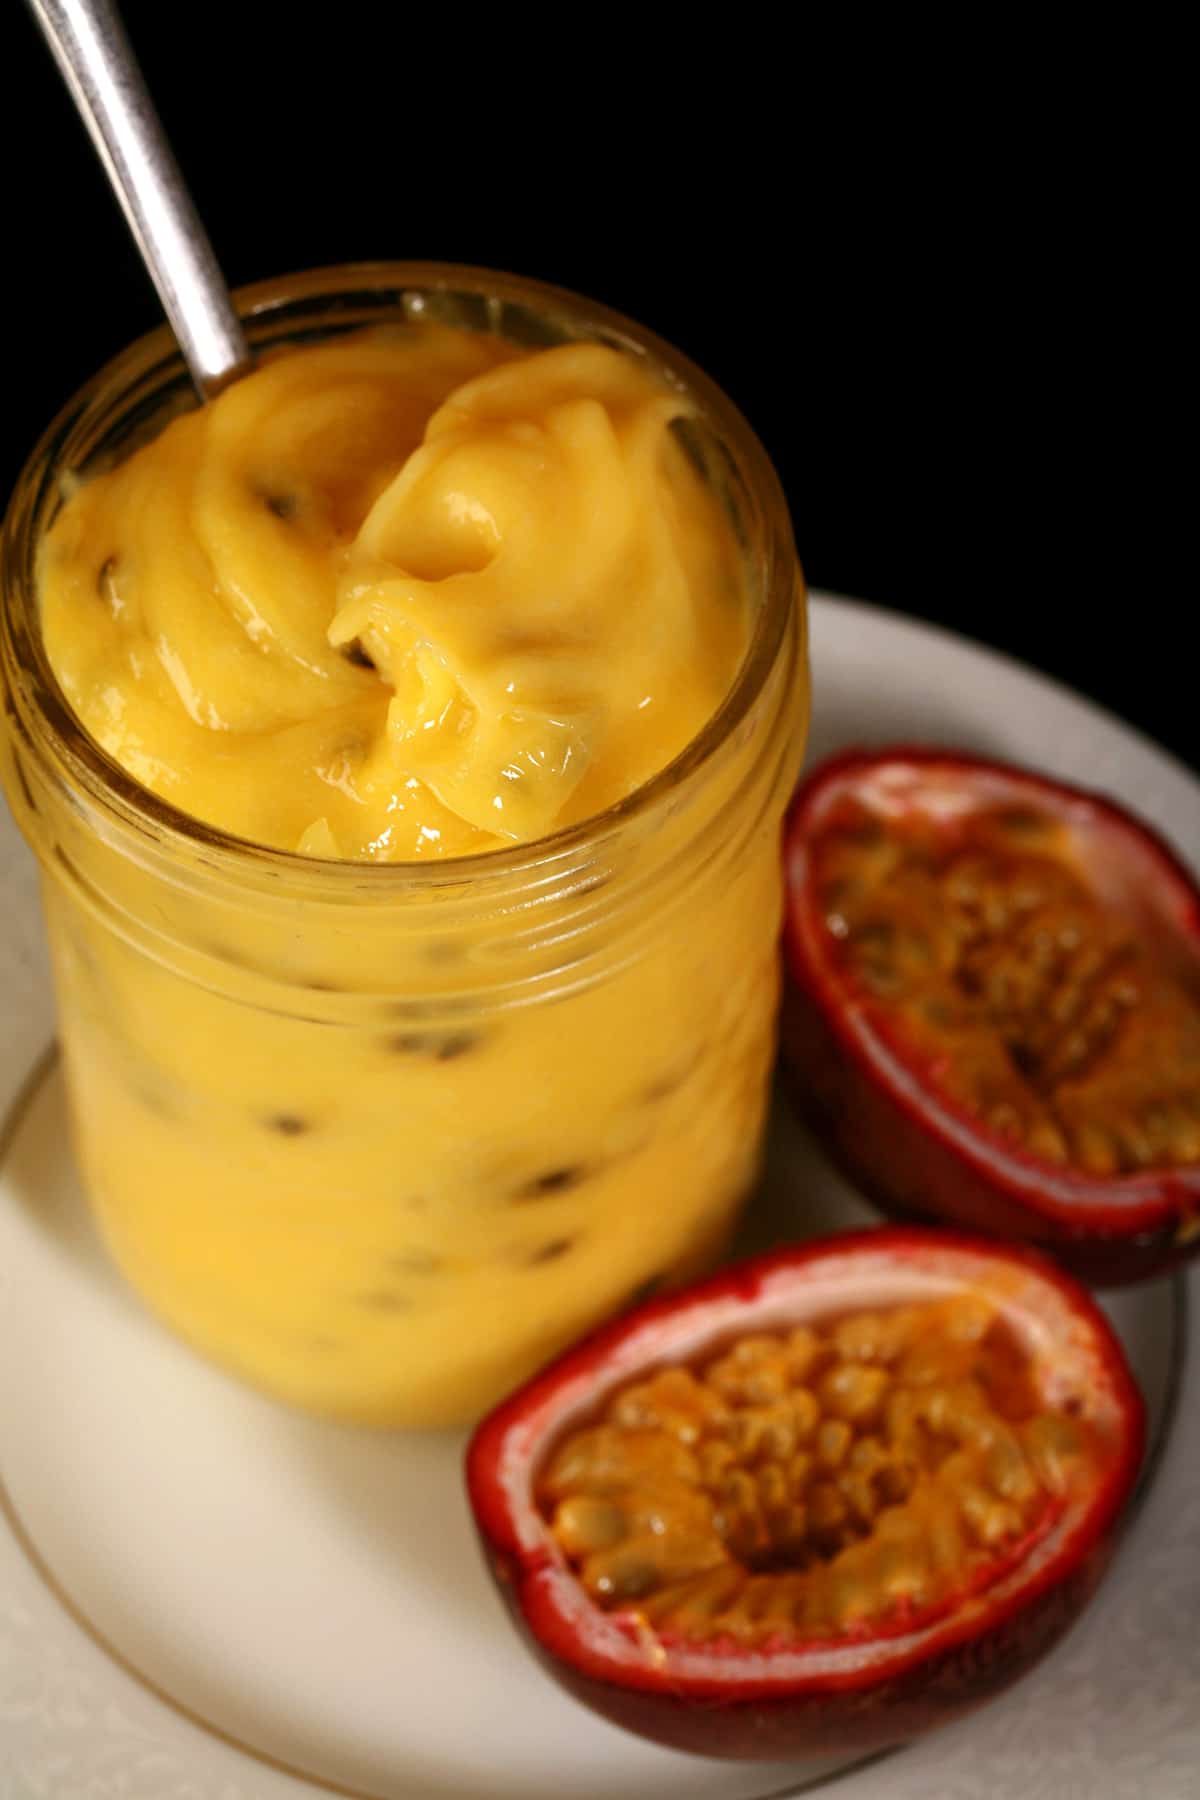 A jar of passionfruit curd on a plate, along with a sliced passionfruit.